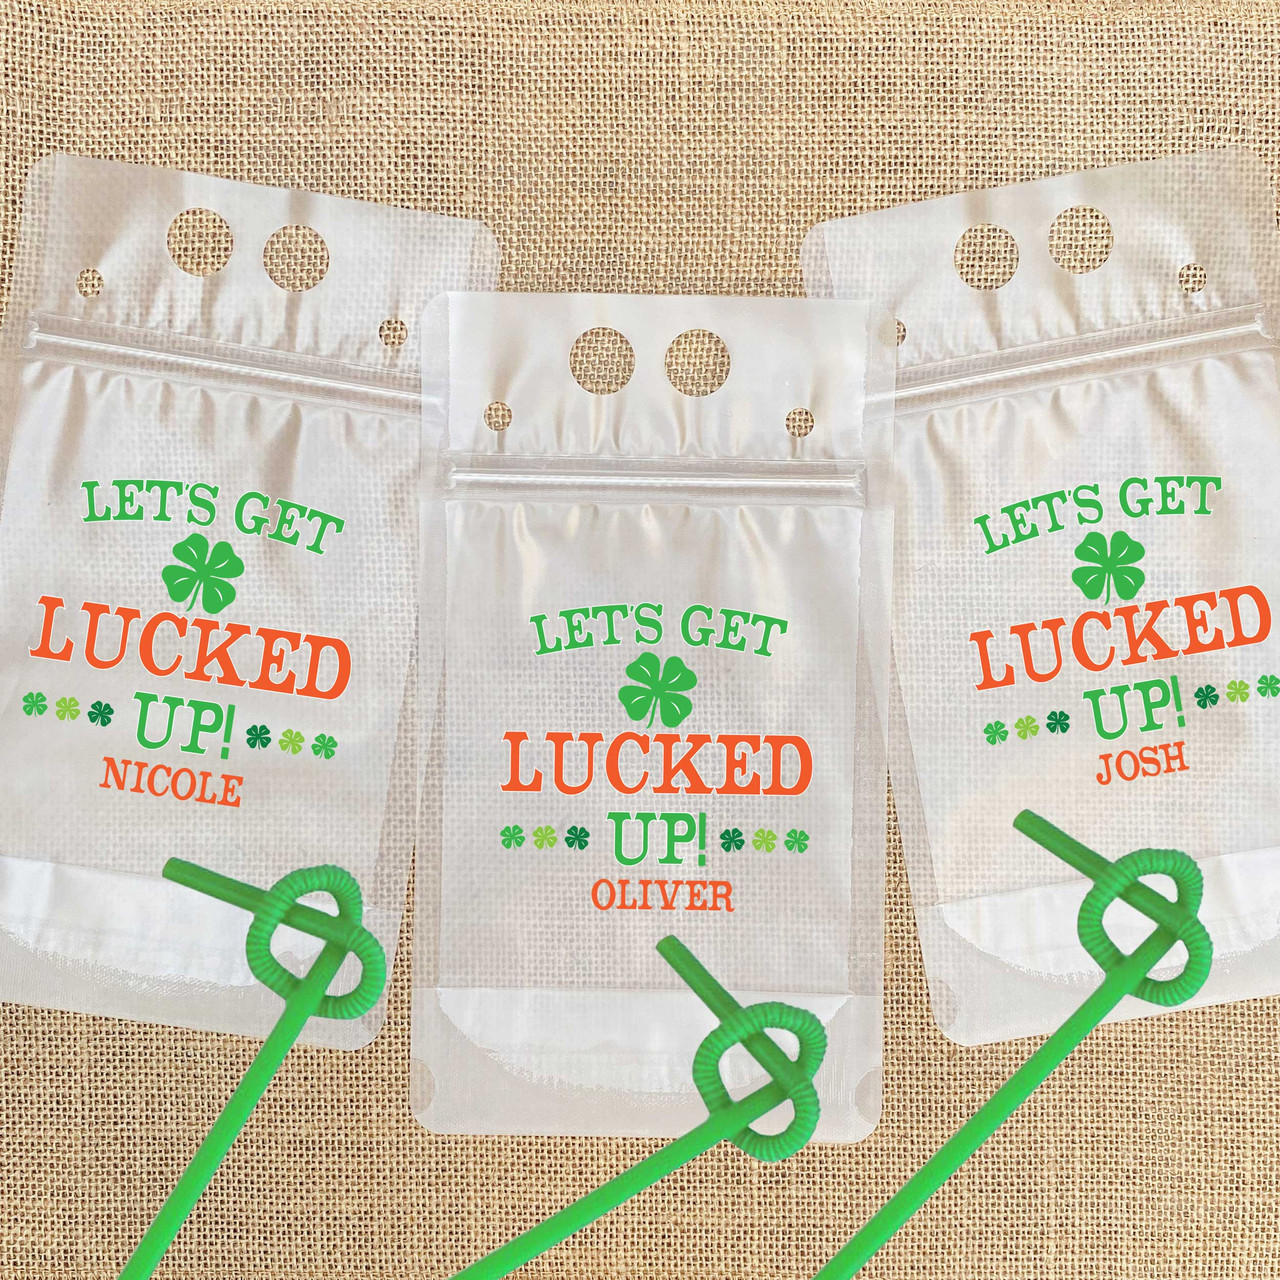 https://cdn11.bigcommerce.com/s-5grzuu6/images/stencil/1280x1280/products/6015/53185/St-Patricks-Day-Custom_Shamrock_Drink-Pouches-Lets_Get_Lucked_Up__02425.1676667521.jpg?c=2